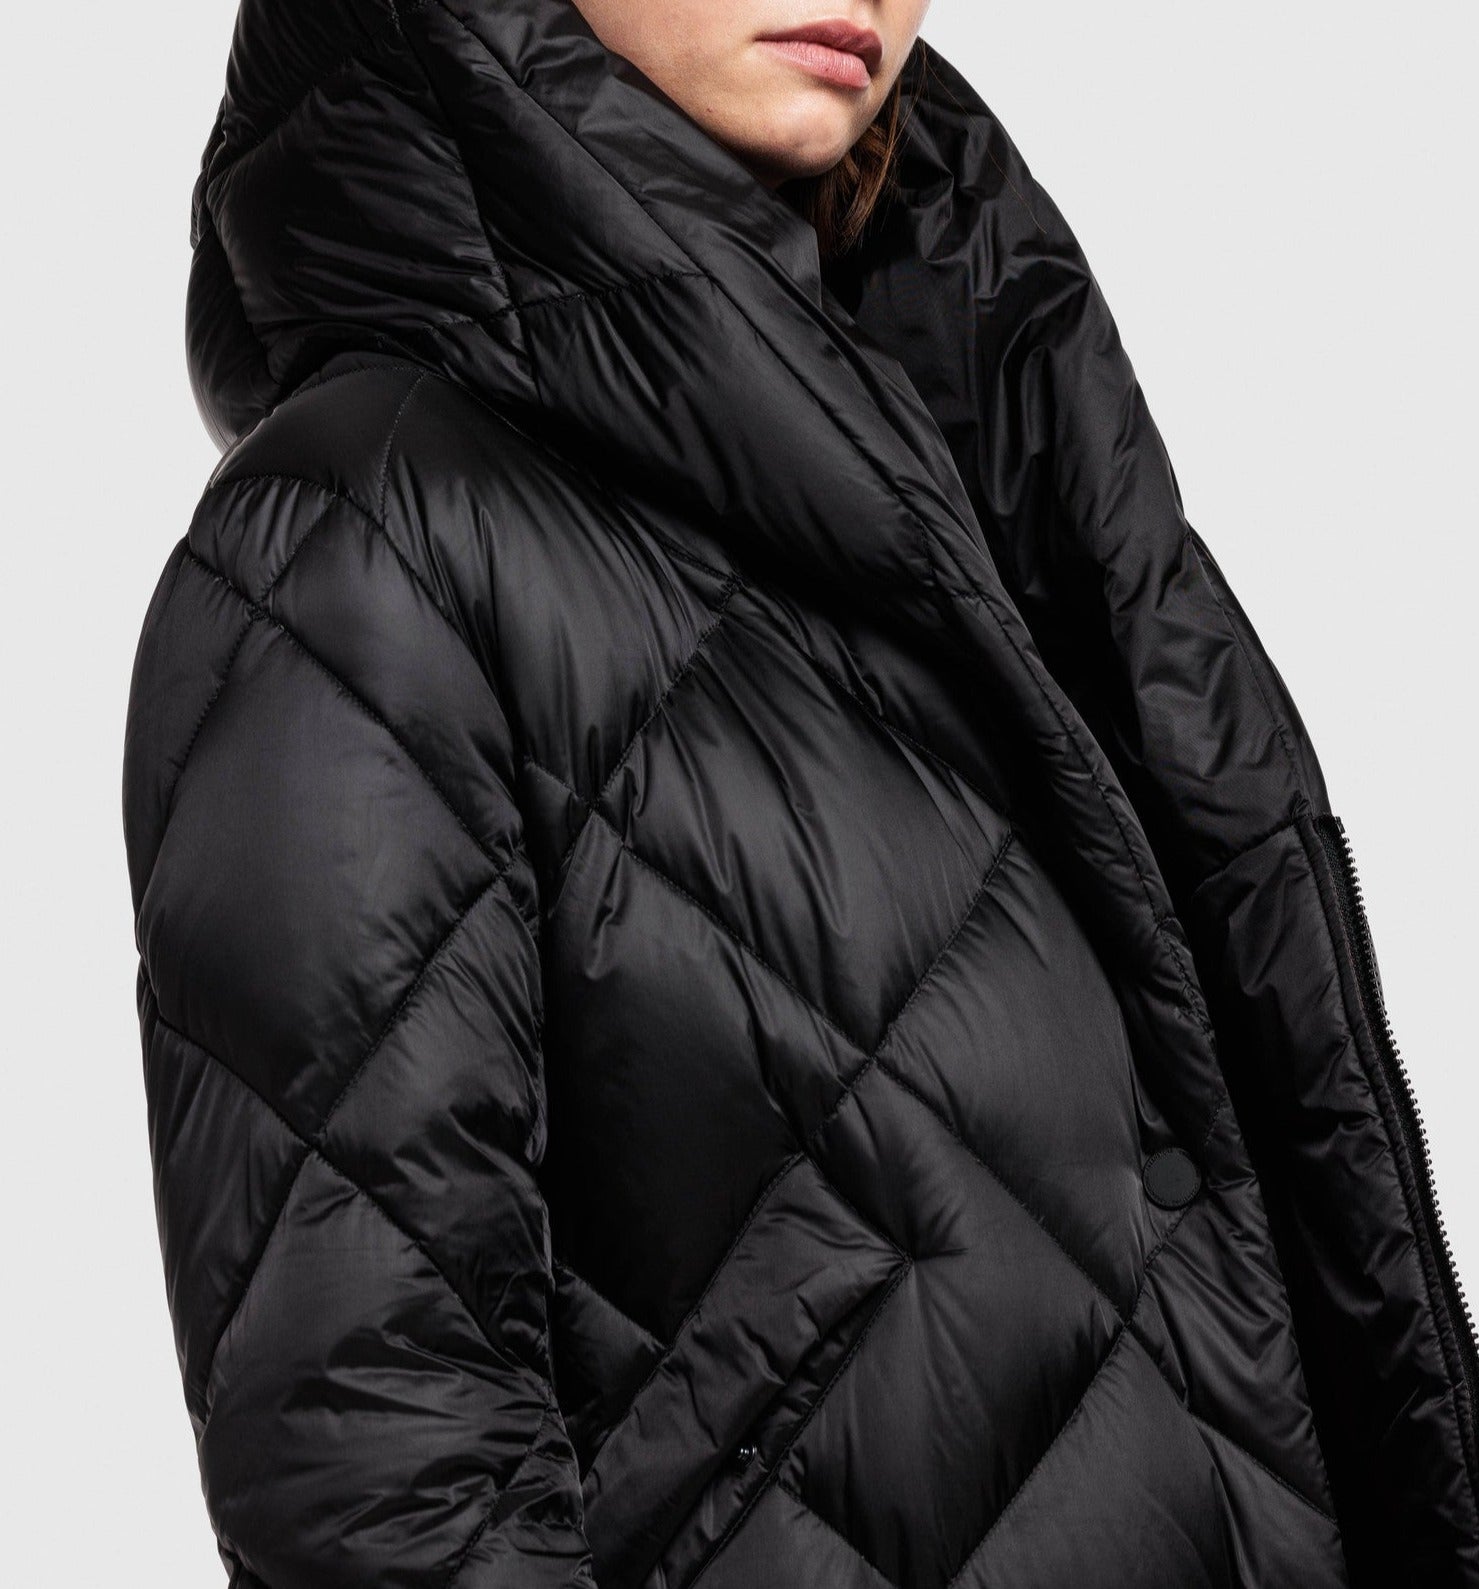 Creenstone Quilted Puffer Coat Black